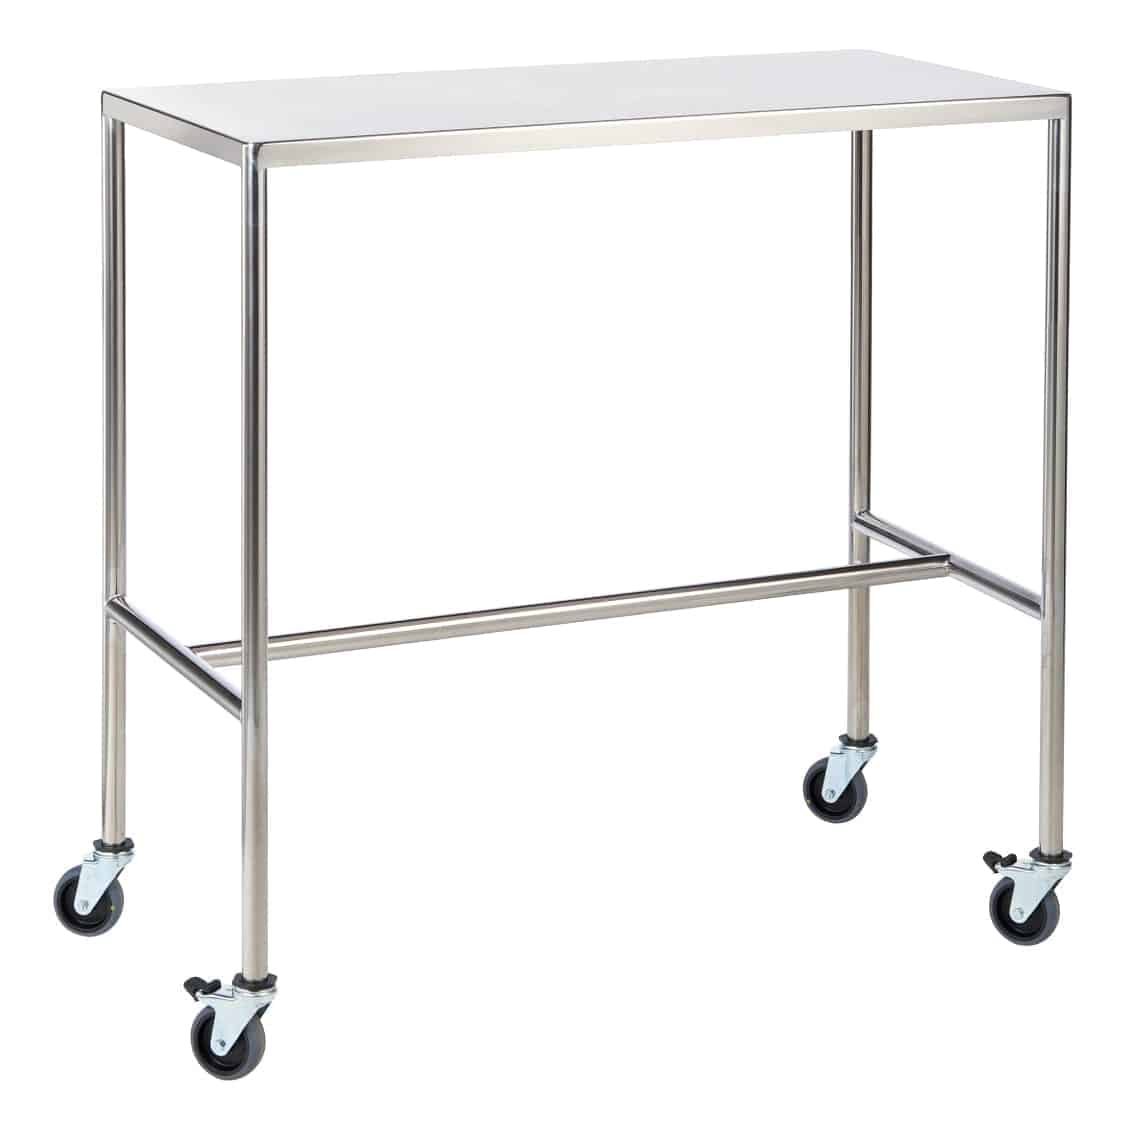 Special Instrument Trolley - Option 1